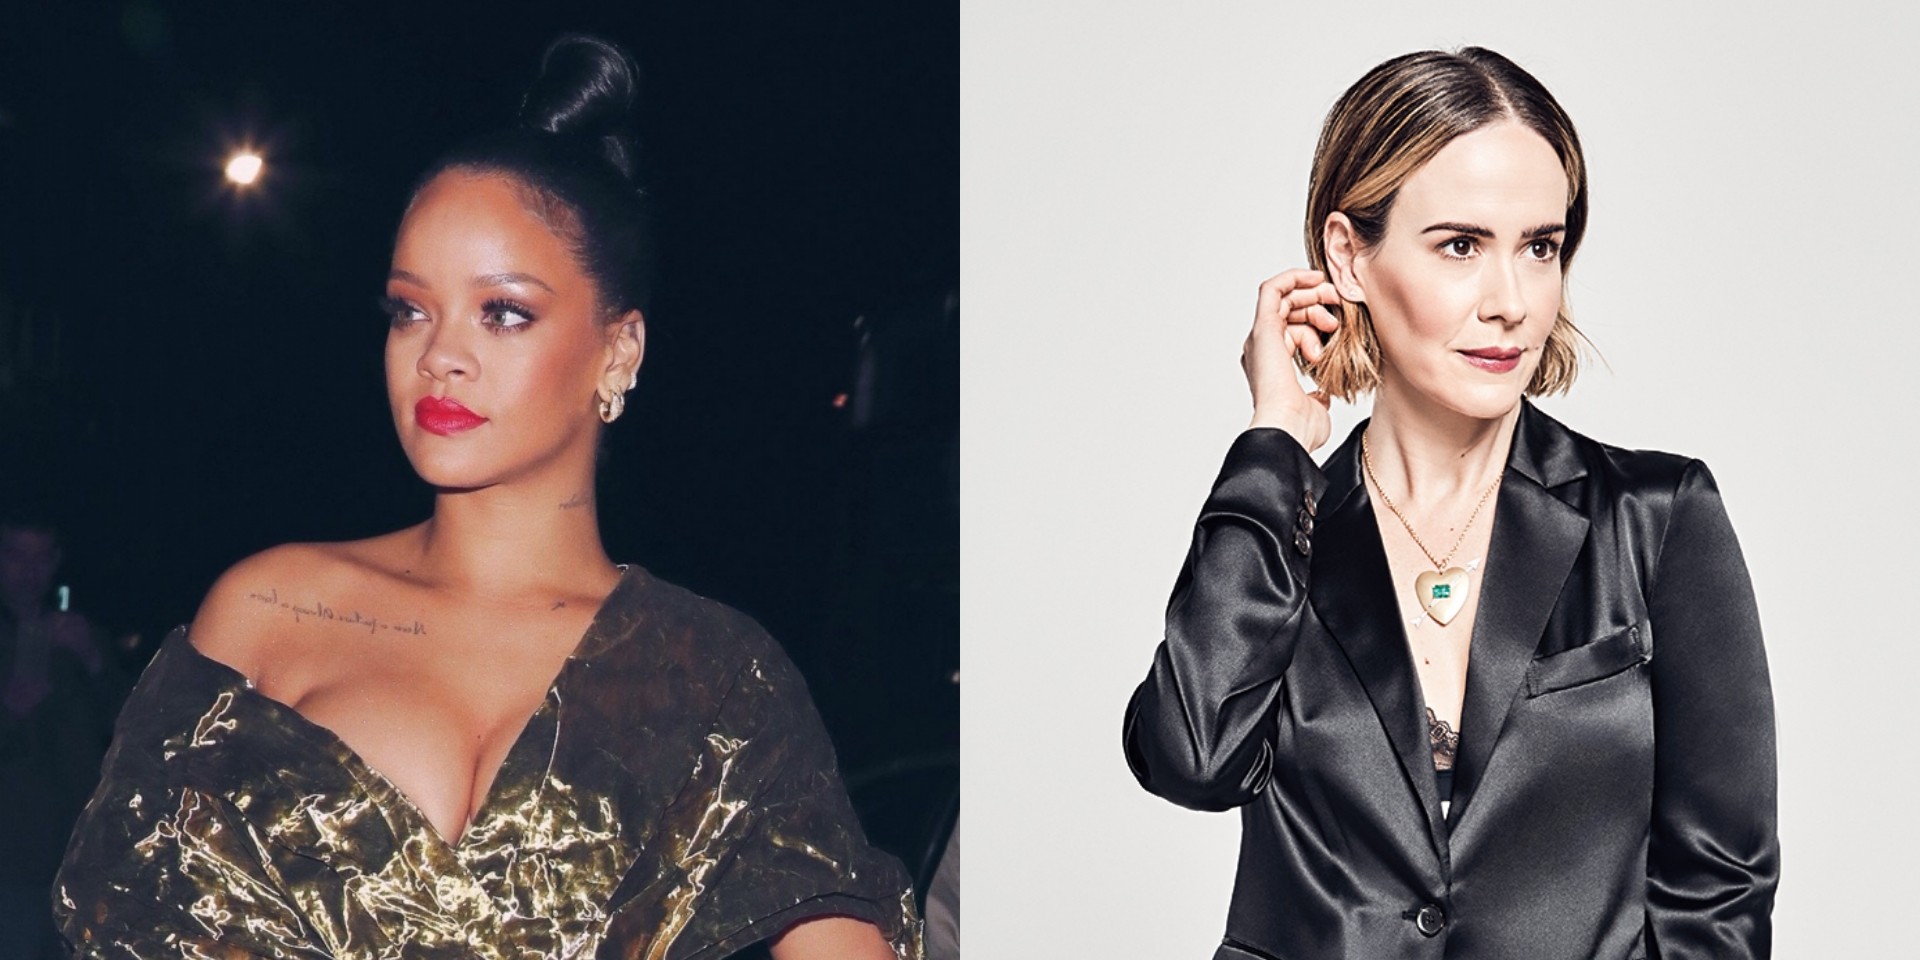 Rihanna chats with Sarah Paulson, reveals next album is “a really fun one”